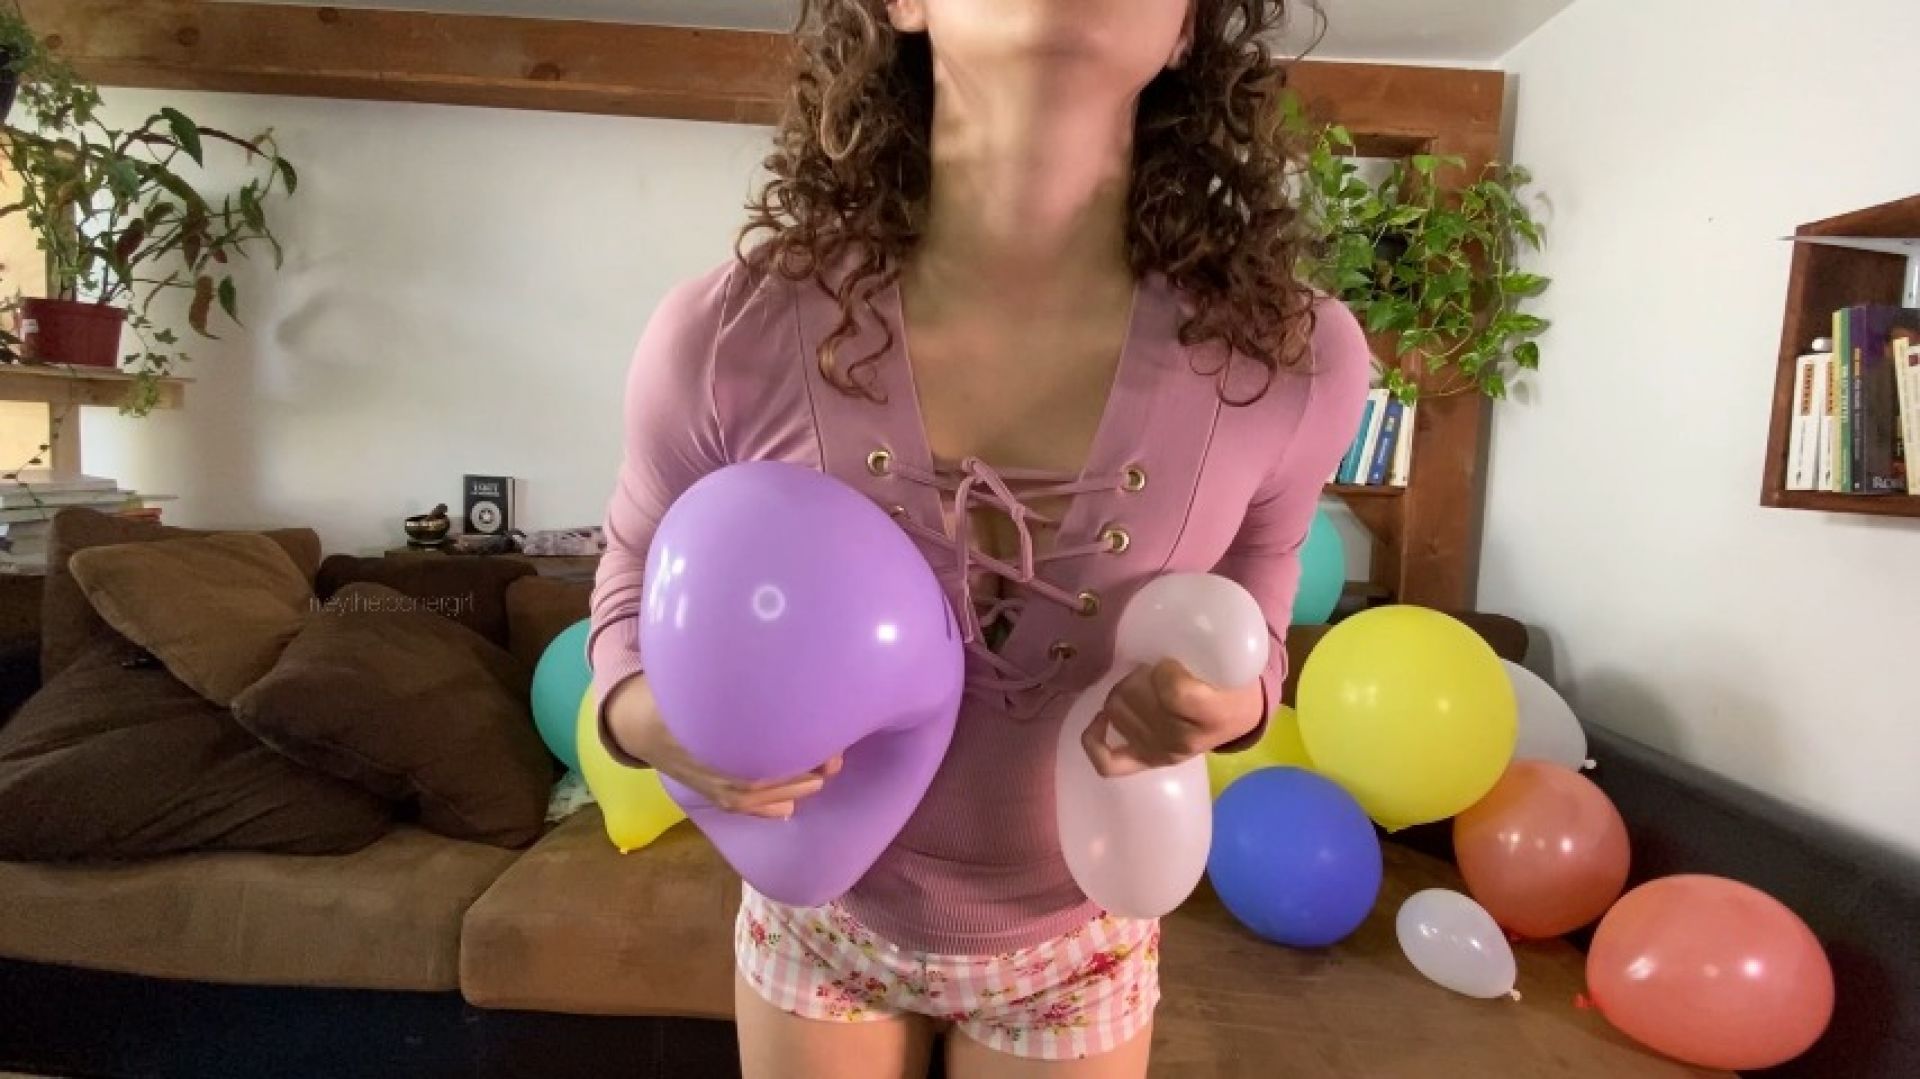 Ballons popping with hand and against breasts